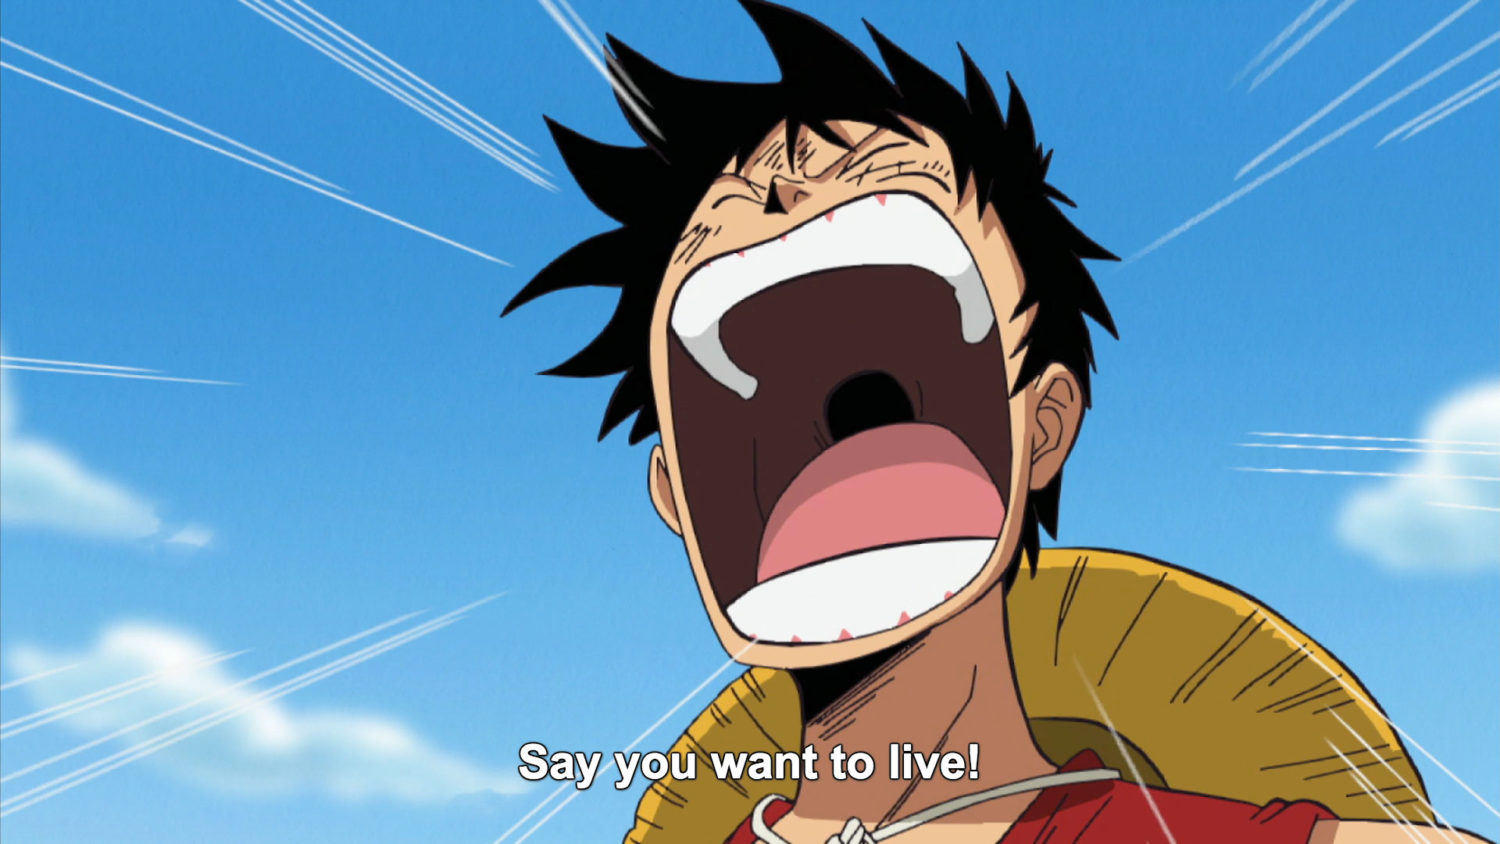 https://lomaymi.com/wp-content/uploads/2016/12/Luffy-say-you-want-to-live.jpg